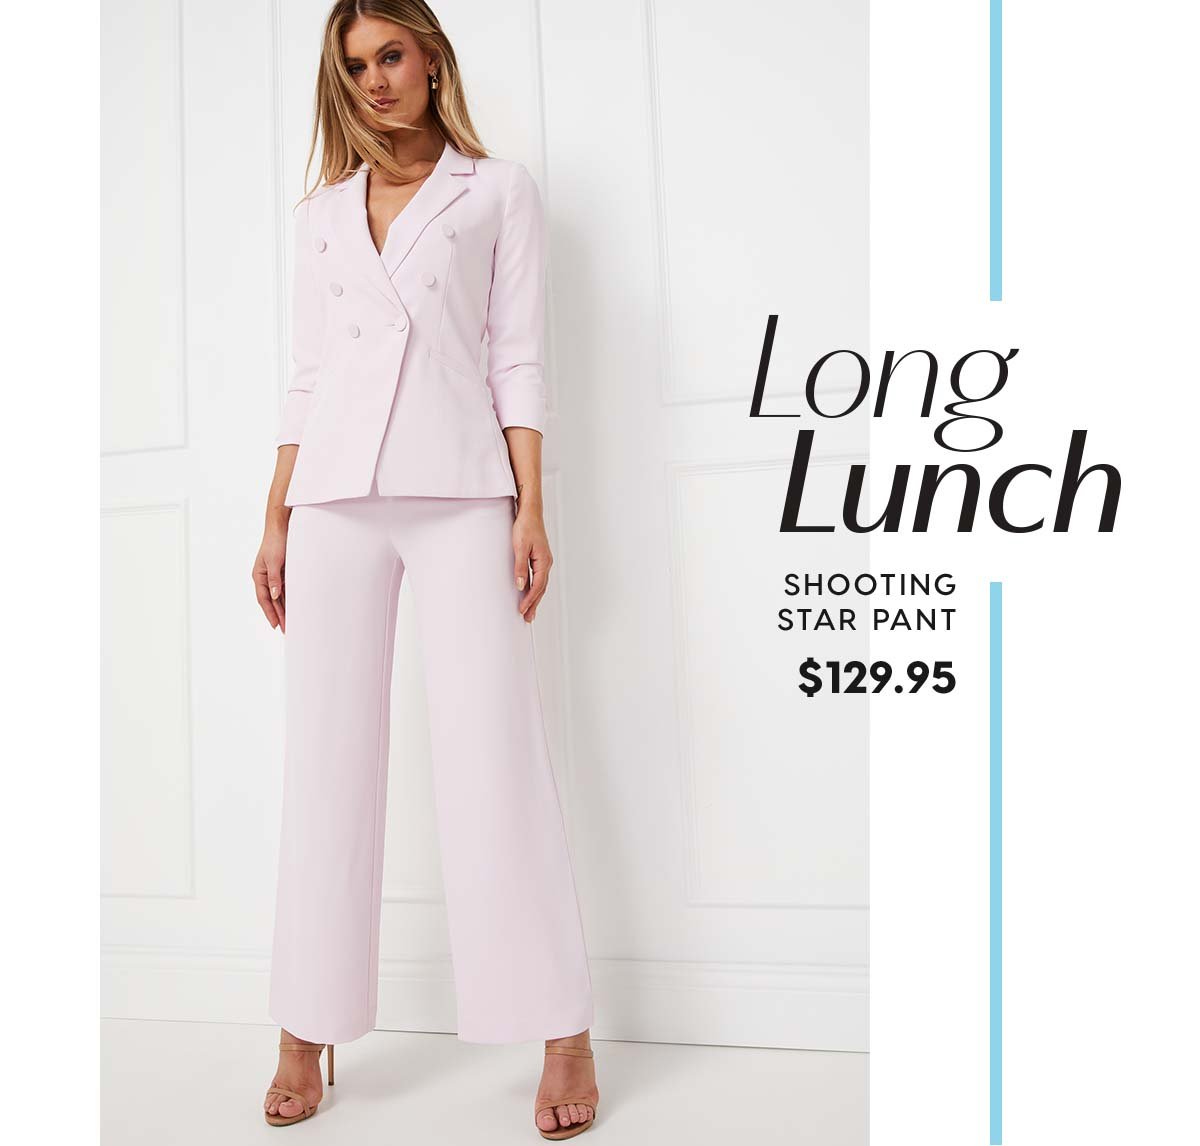 Long Lunch. Shooting Star Pant $129.95